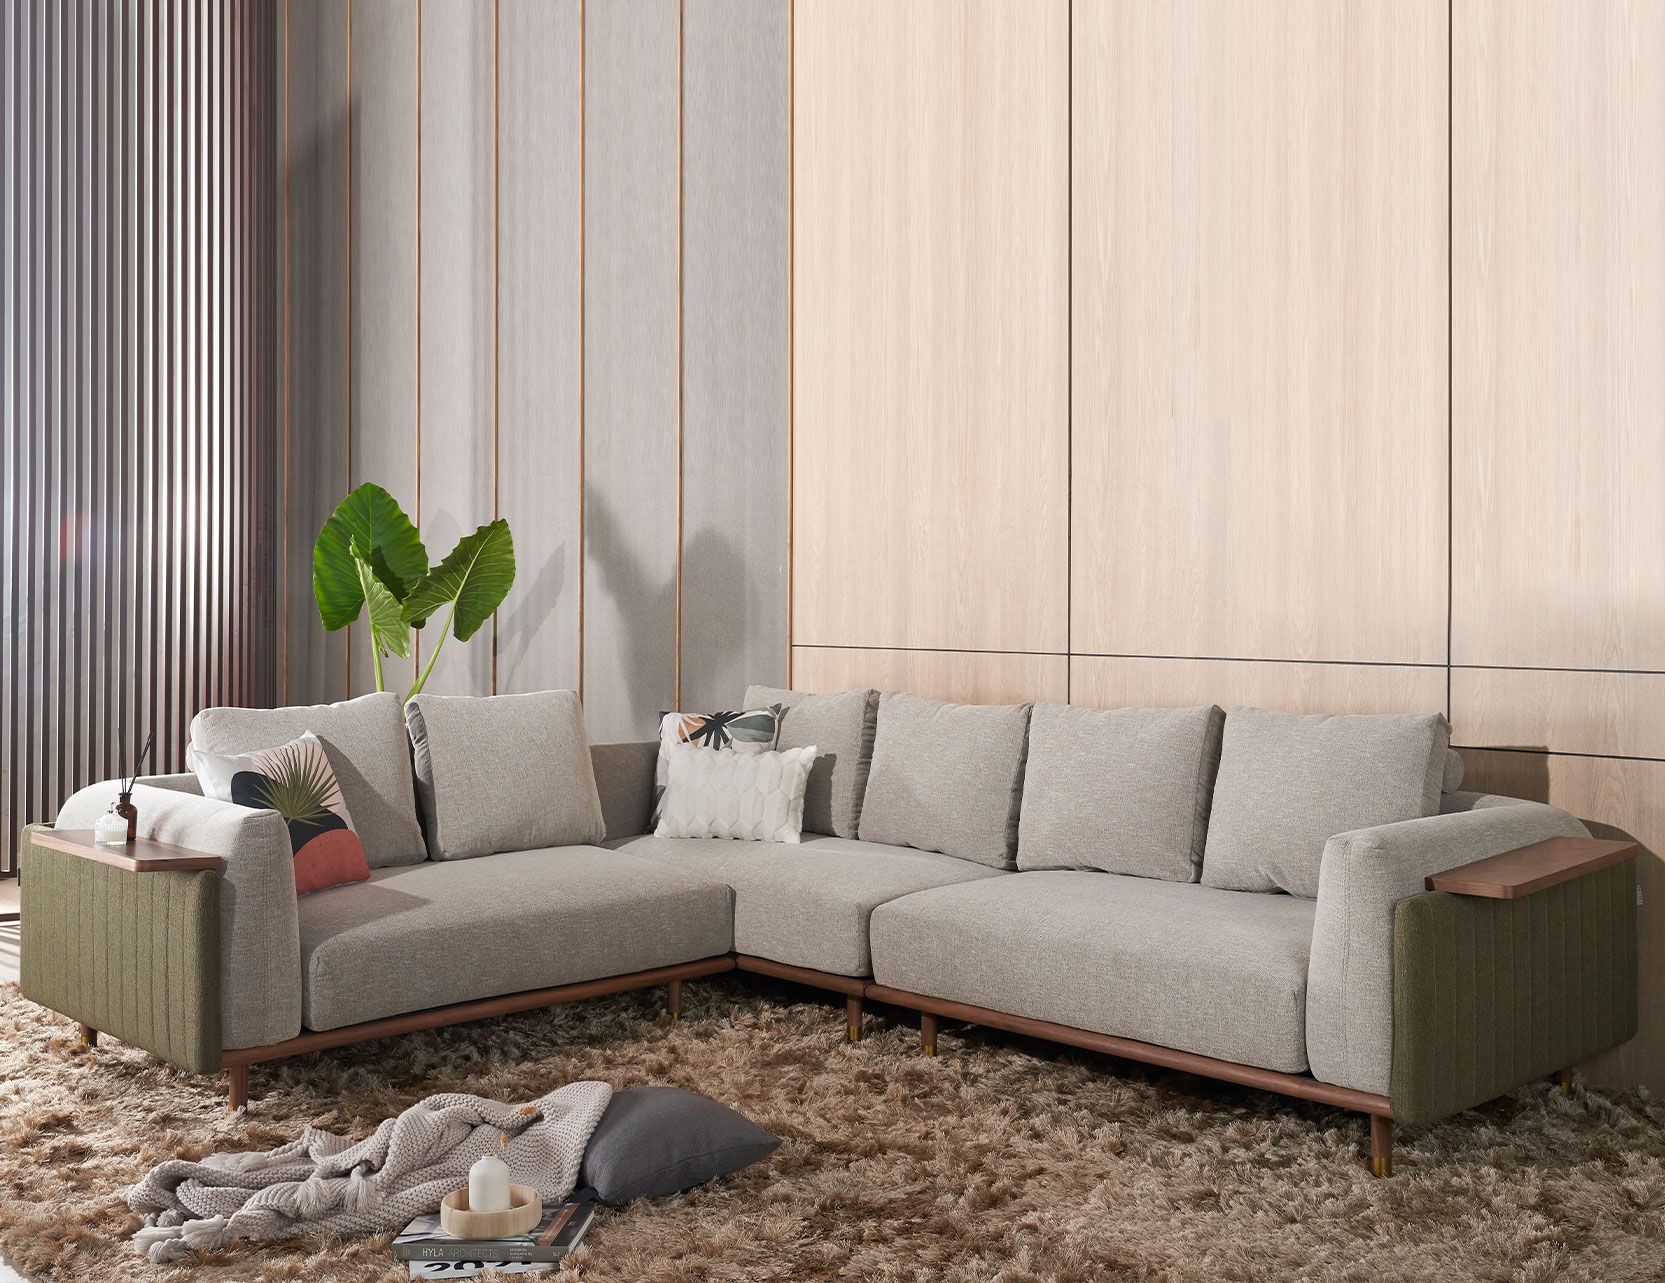 Guide To Modern Sofas In The Living Room: L Shaped Sofas Within Modern L Shaped Fabric Upholstered Couches (Gallery 1 of 20)